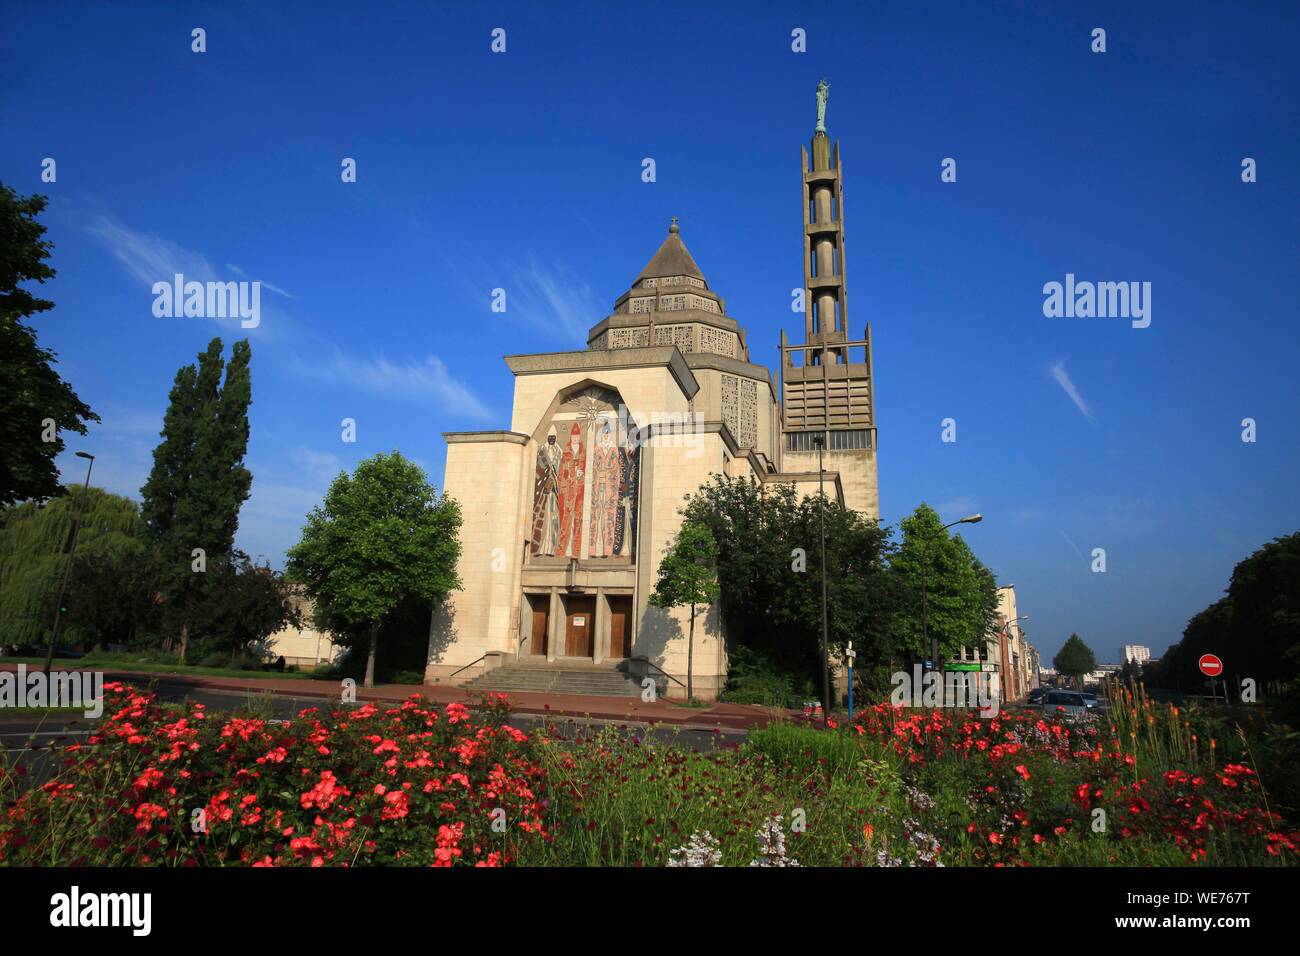 France, Somme, Amiens, St Honore Church in Amiens Stock Photo